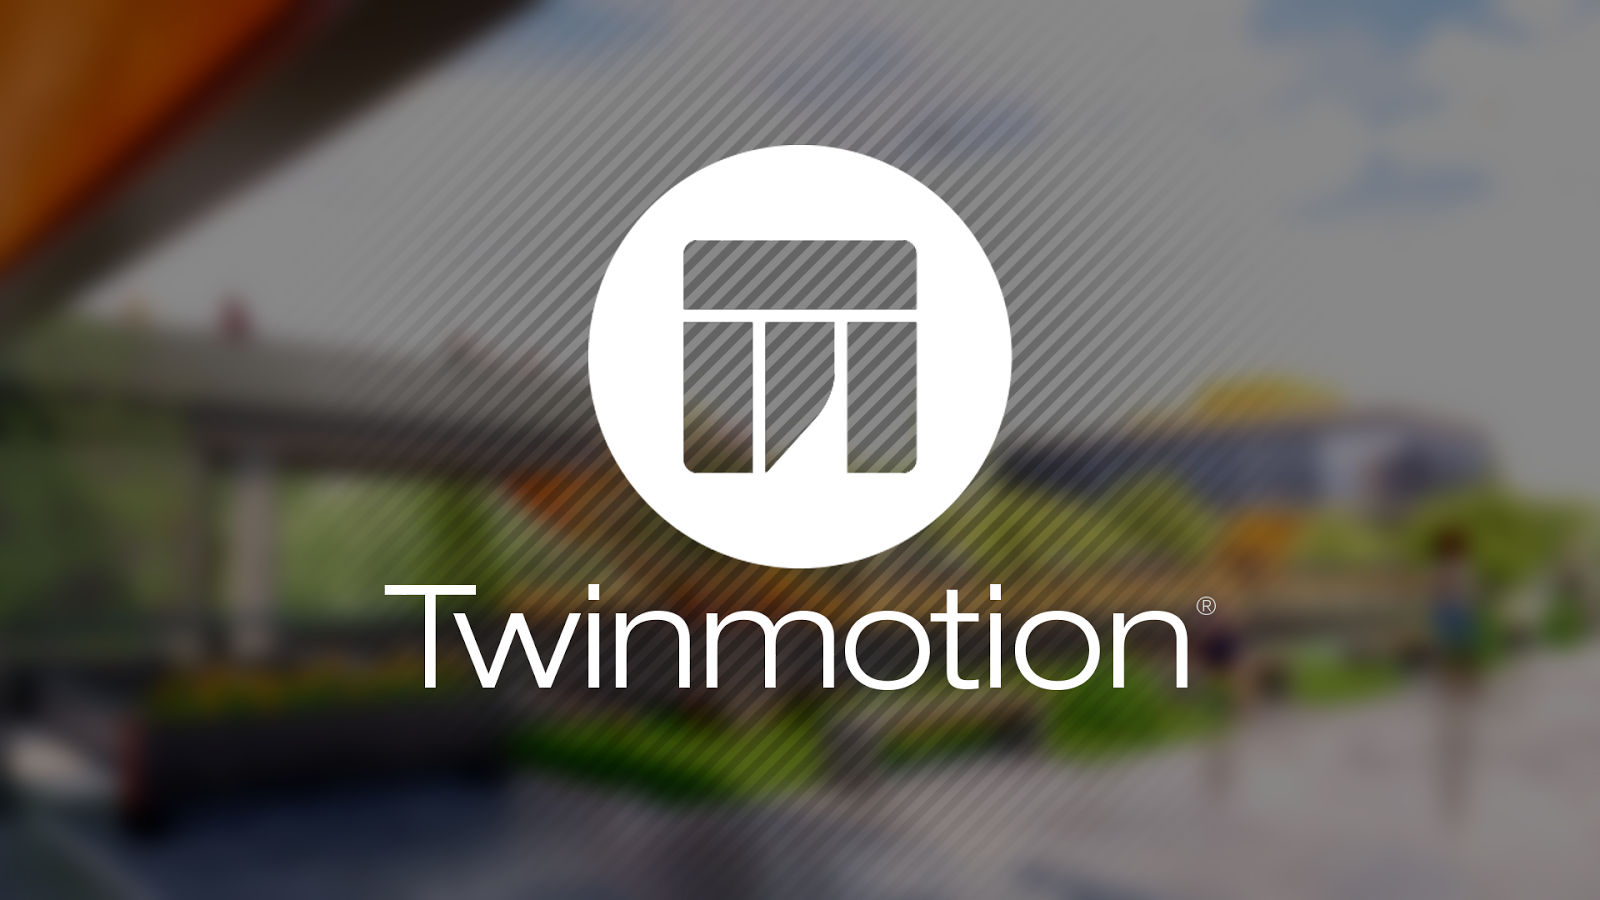 twinmotion 2018 by abvent